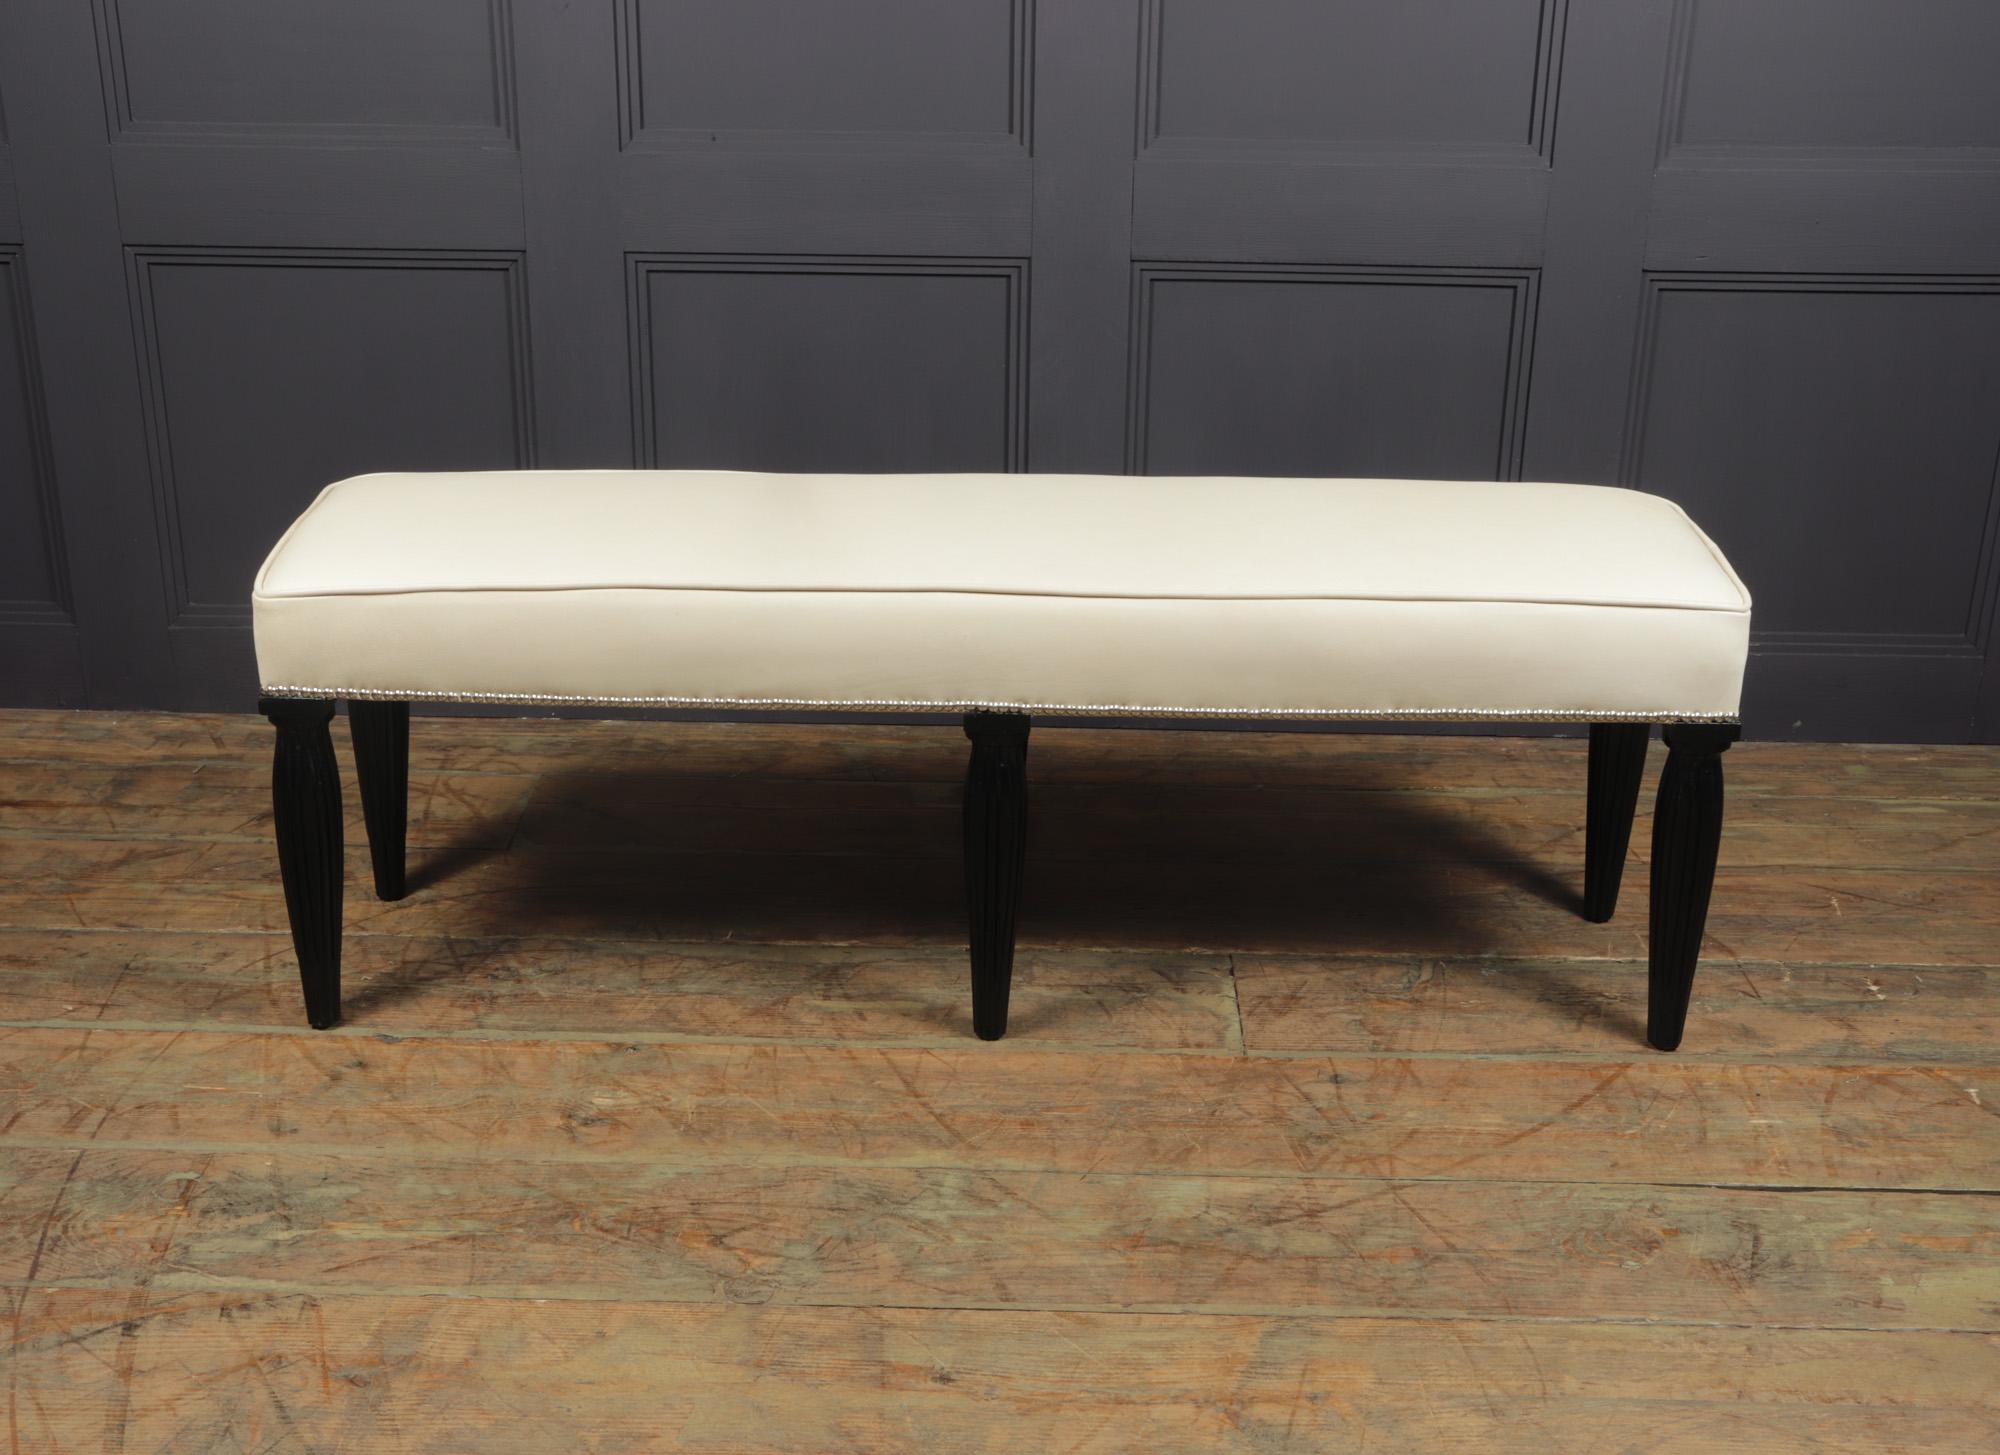 Early 20th Century French Art Deco Window Seat, c1925